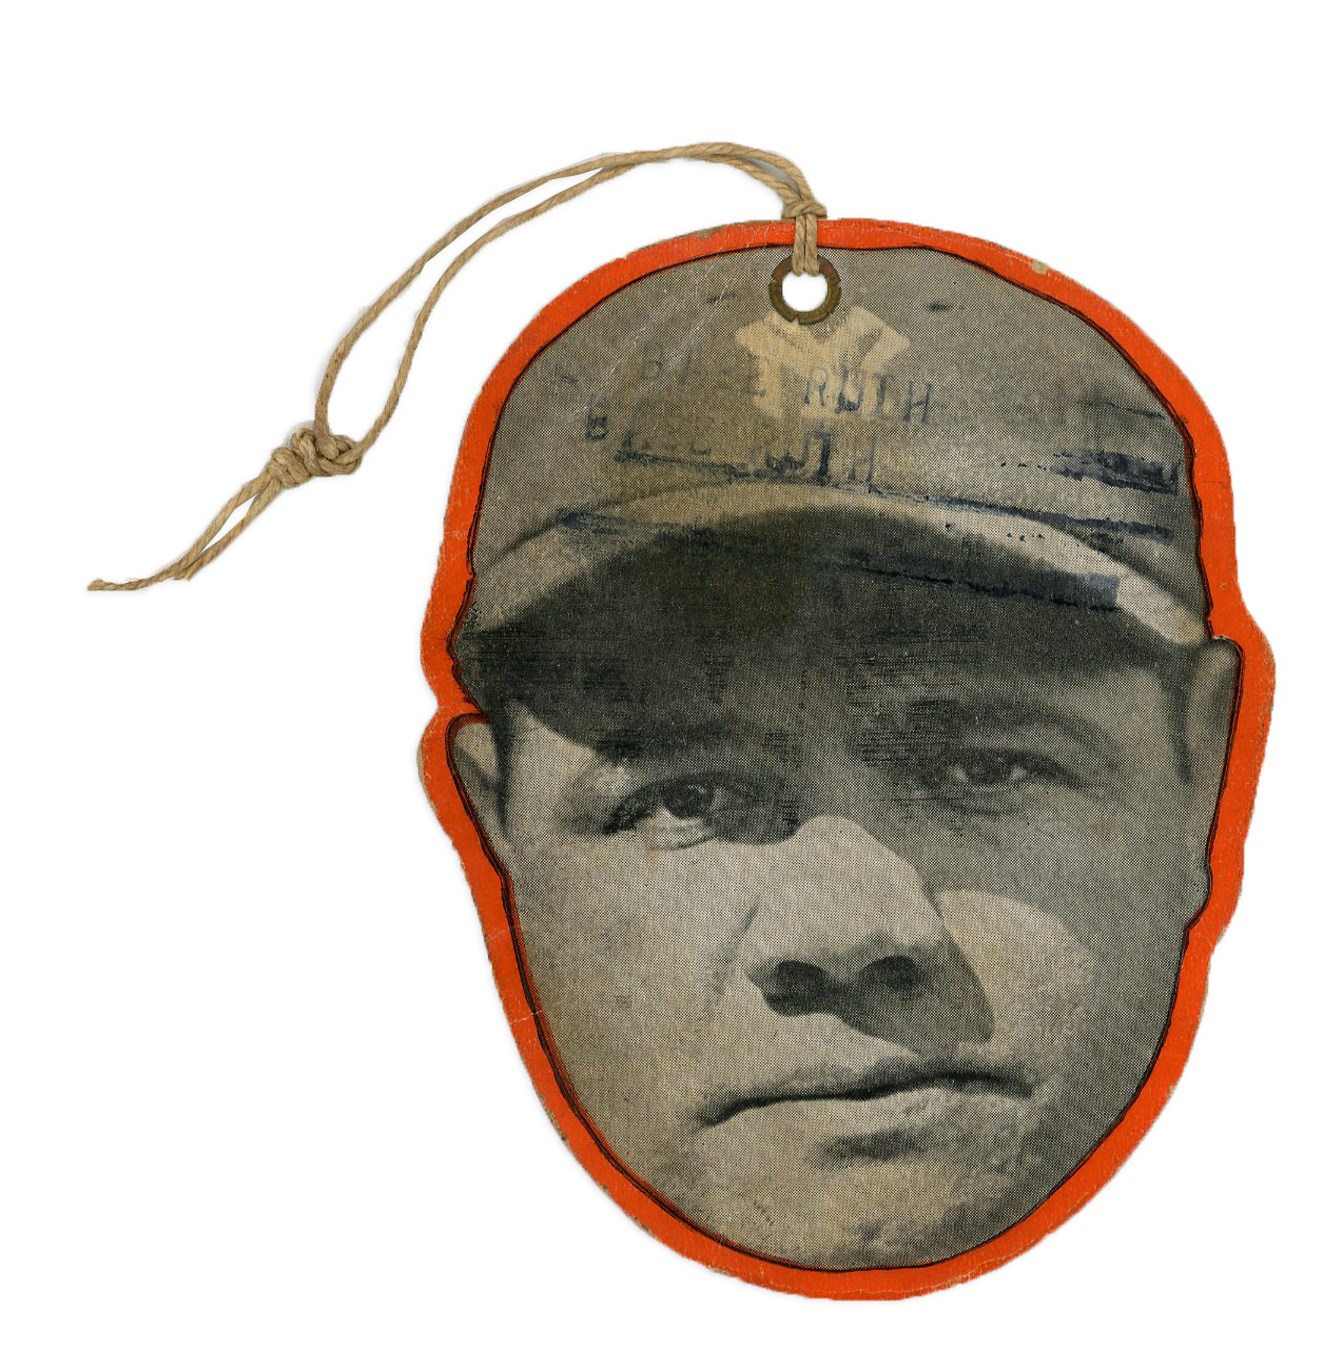 - Babe Ruth 1920s Reach Large Die-Cut Illustrated Equipment Tag in the Shape of Ruth's Head